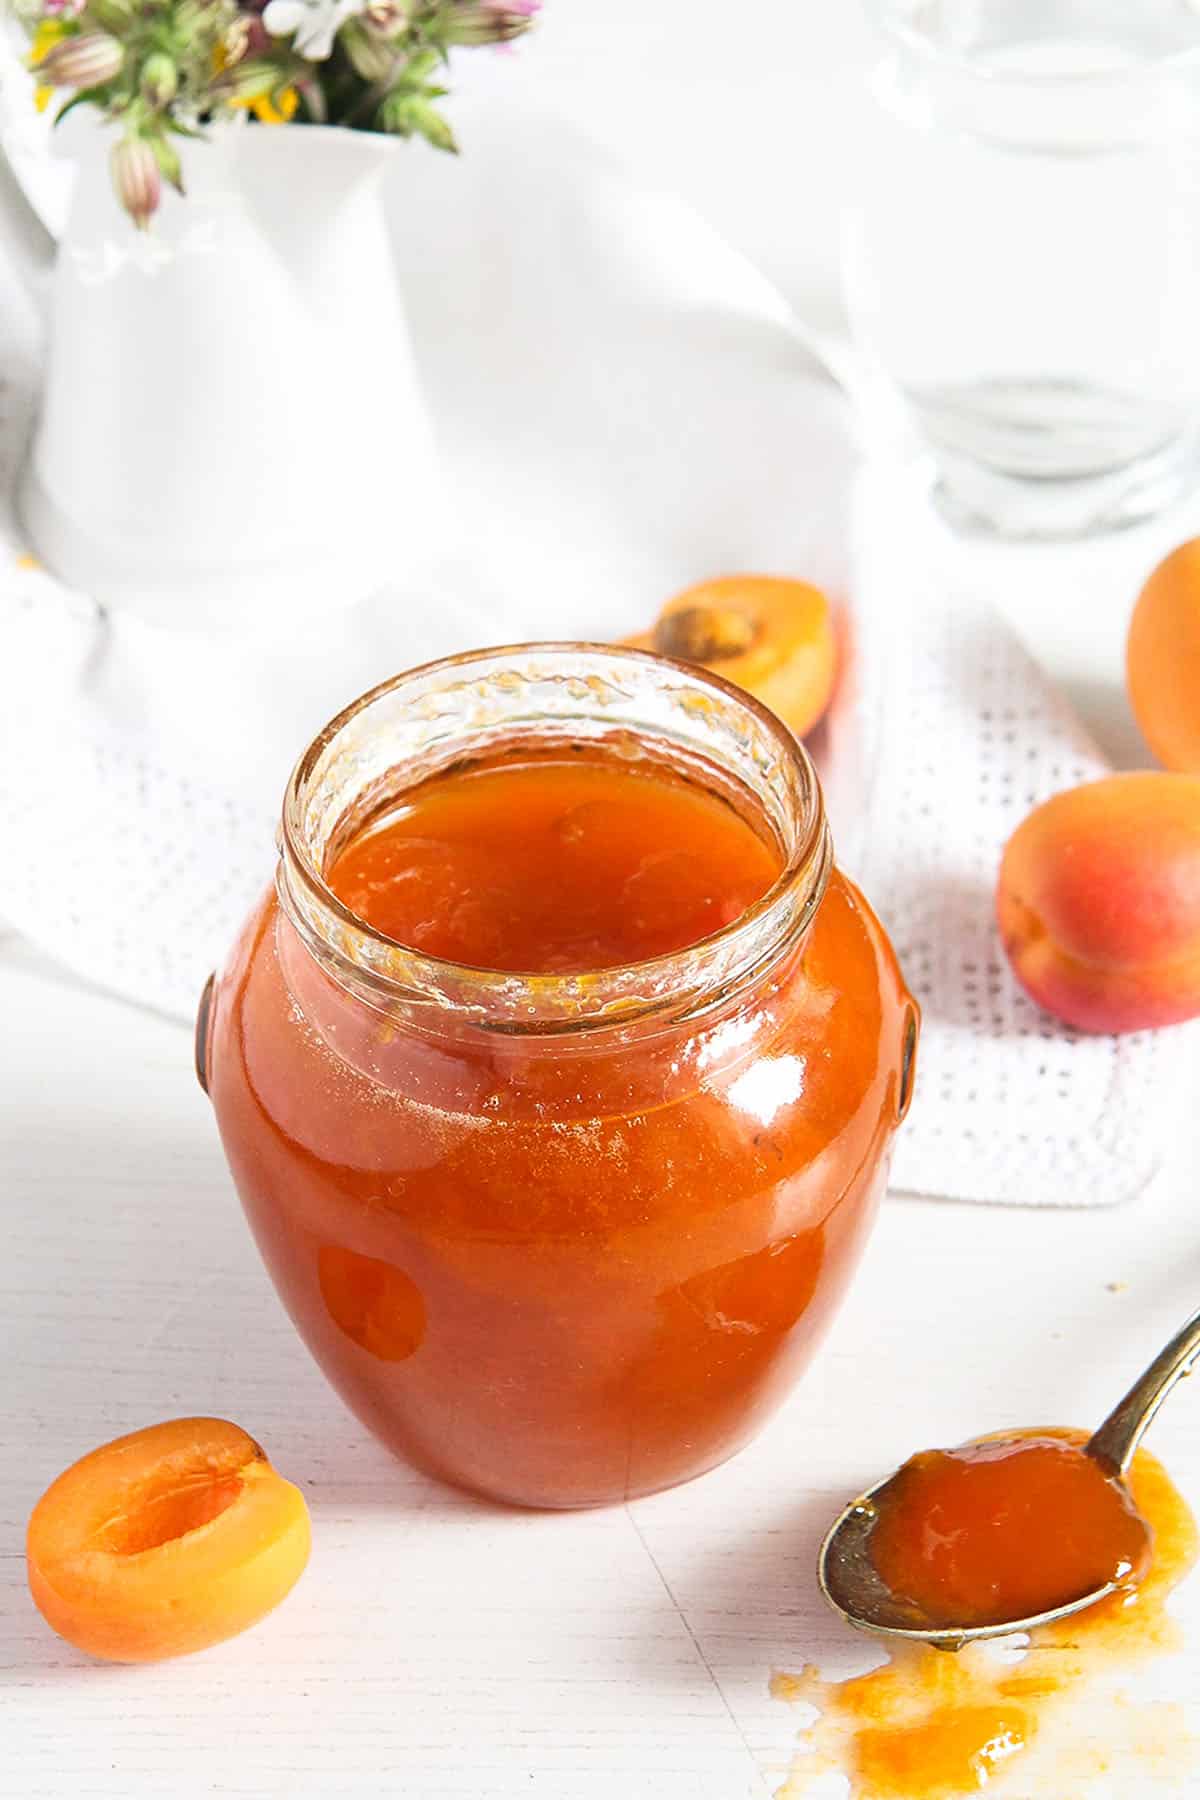 apricot jam in a small jar and on a spoon spilling on the table.